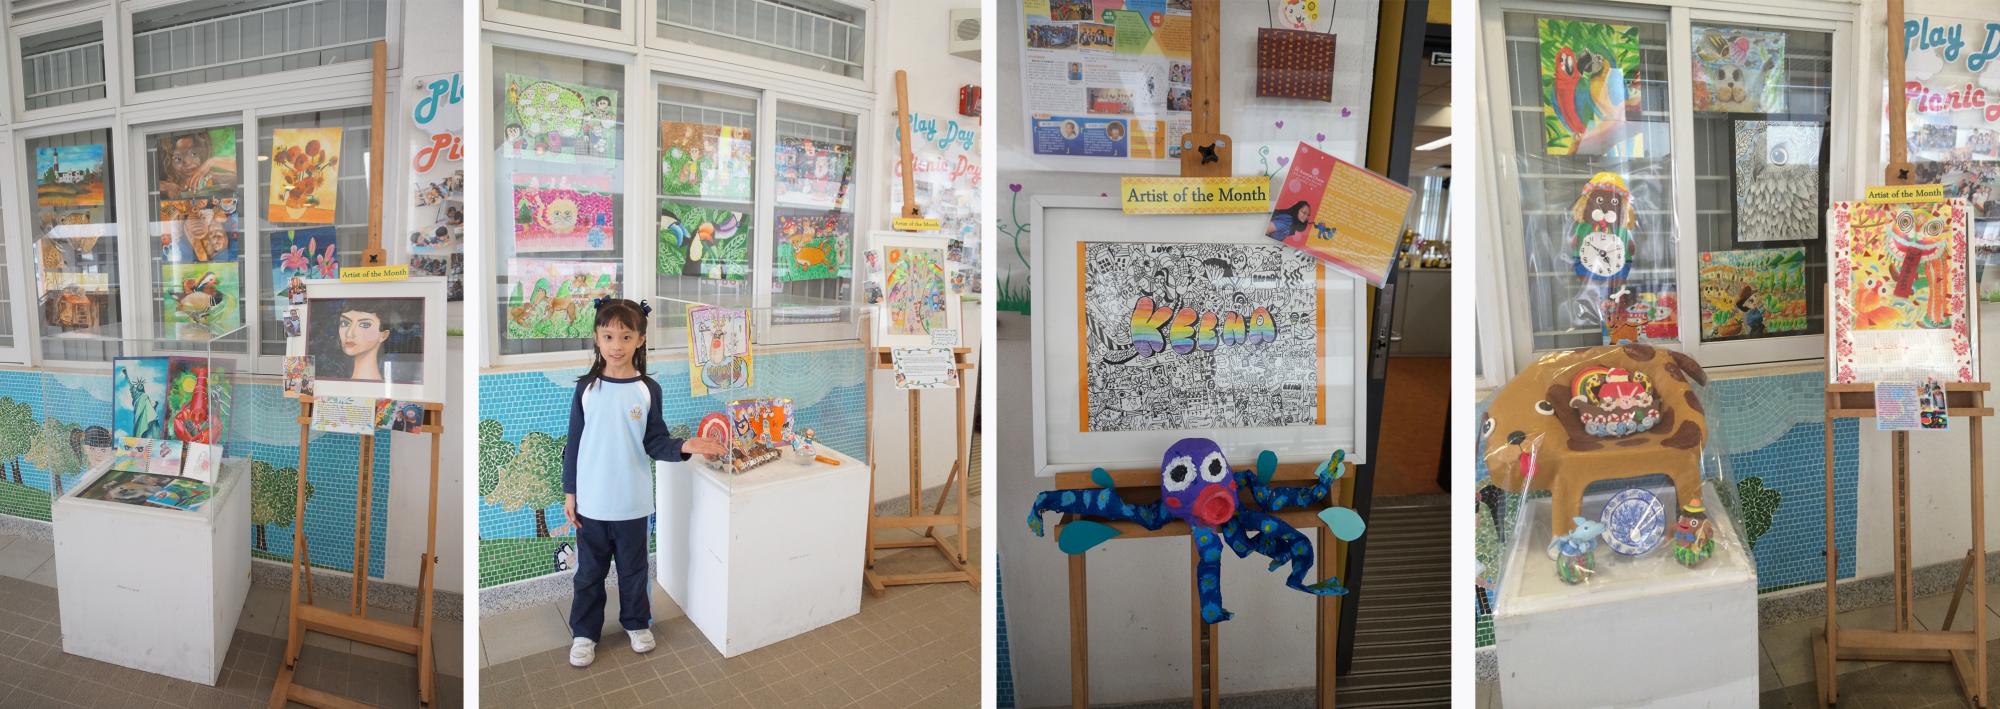 Students selected as “Artist of the Month”and their outstanding artworks were on display